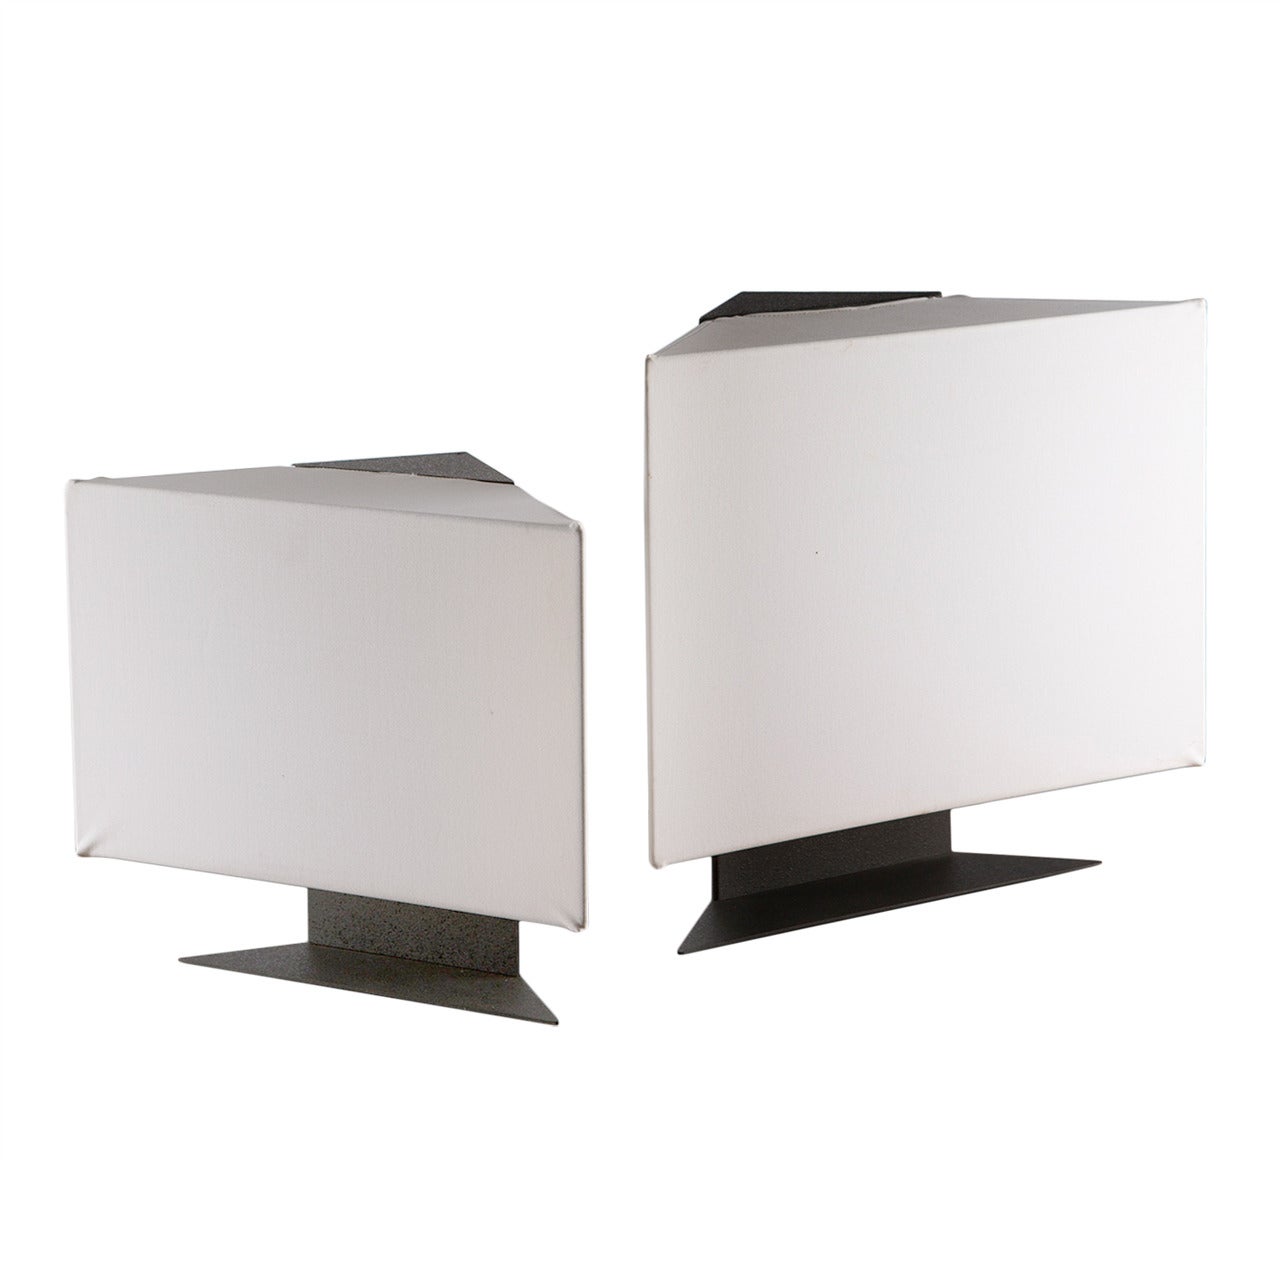 Pair of "Accademia" Table Lamps by Cini Boeri